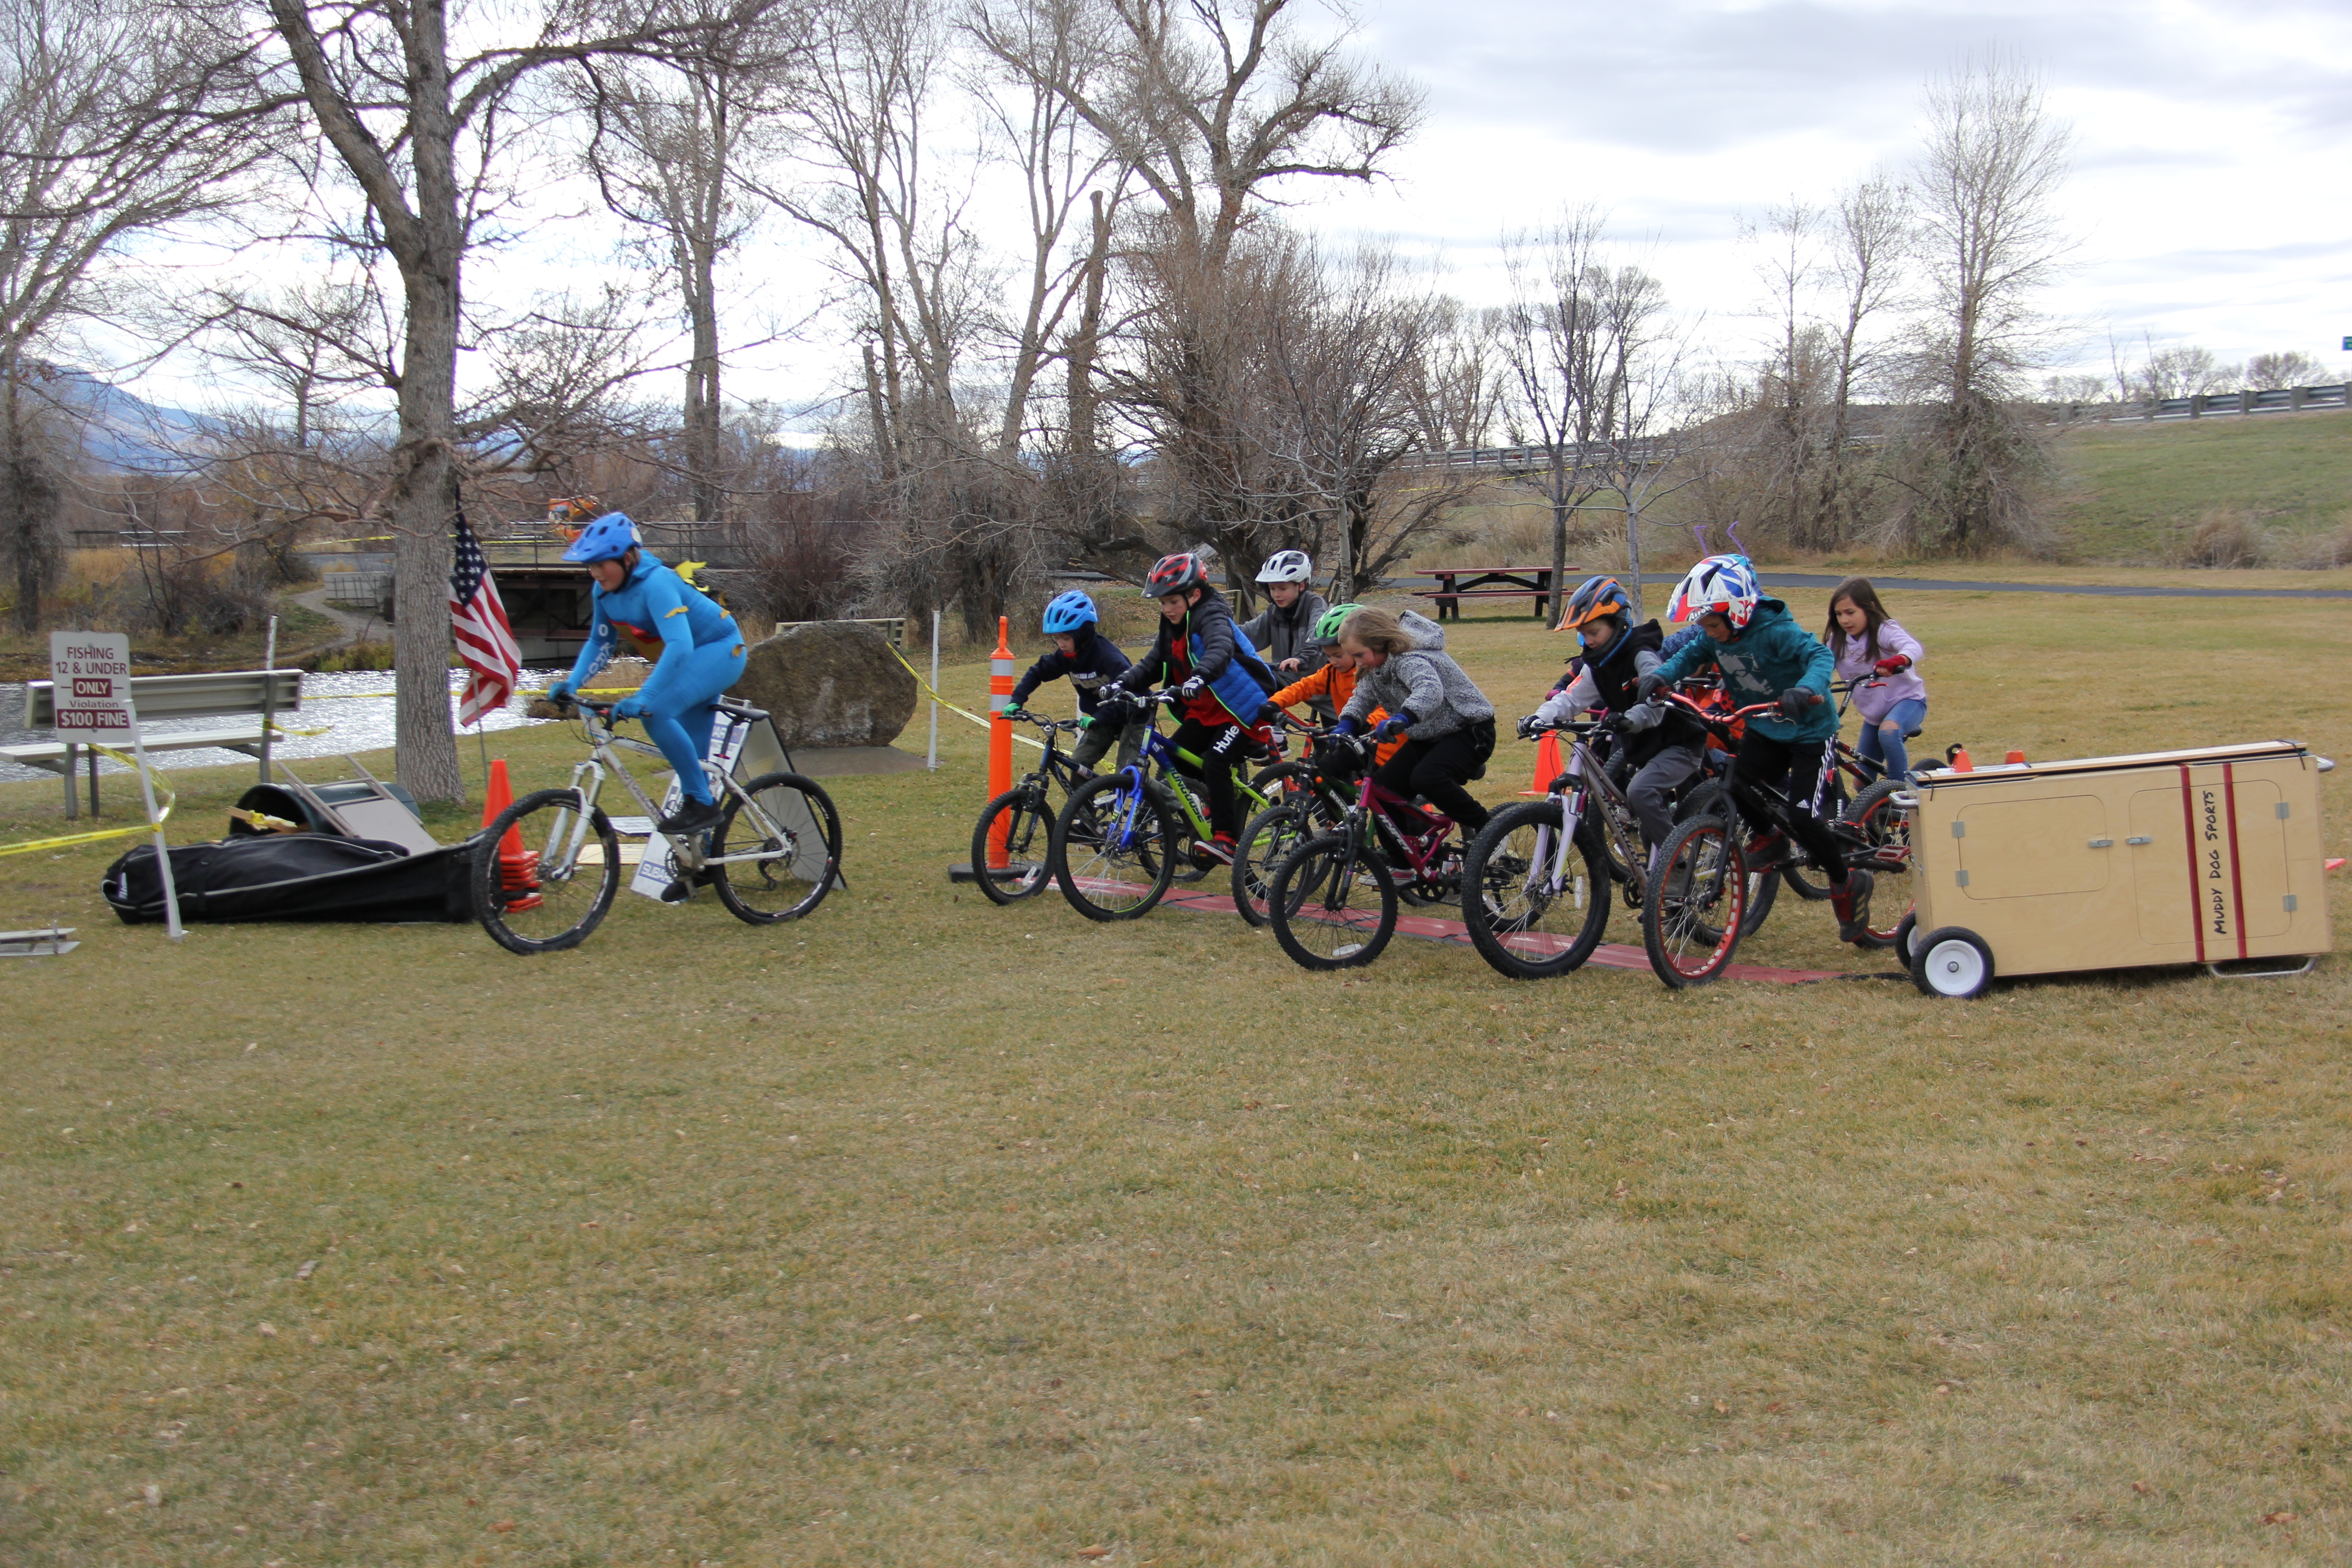 Check out these awesome kids - they can race!